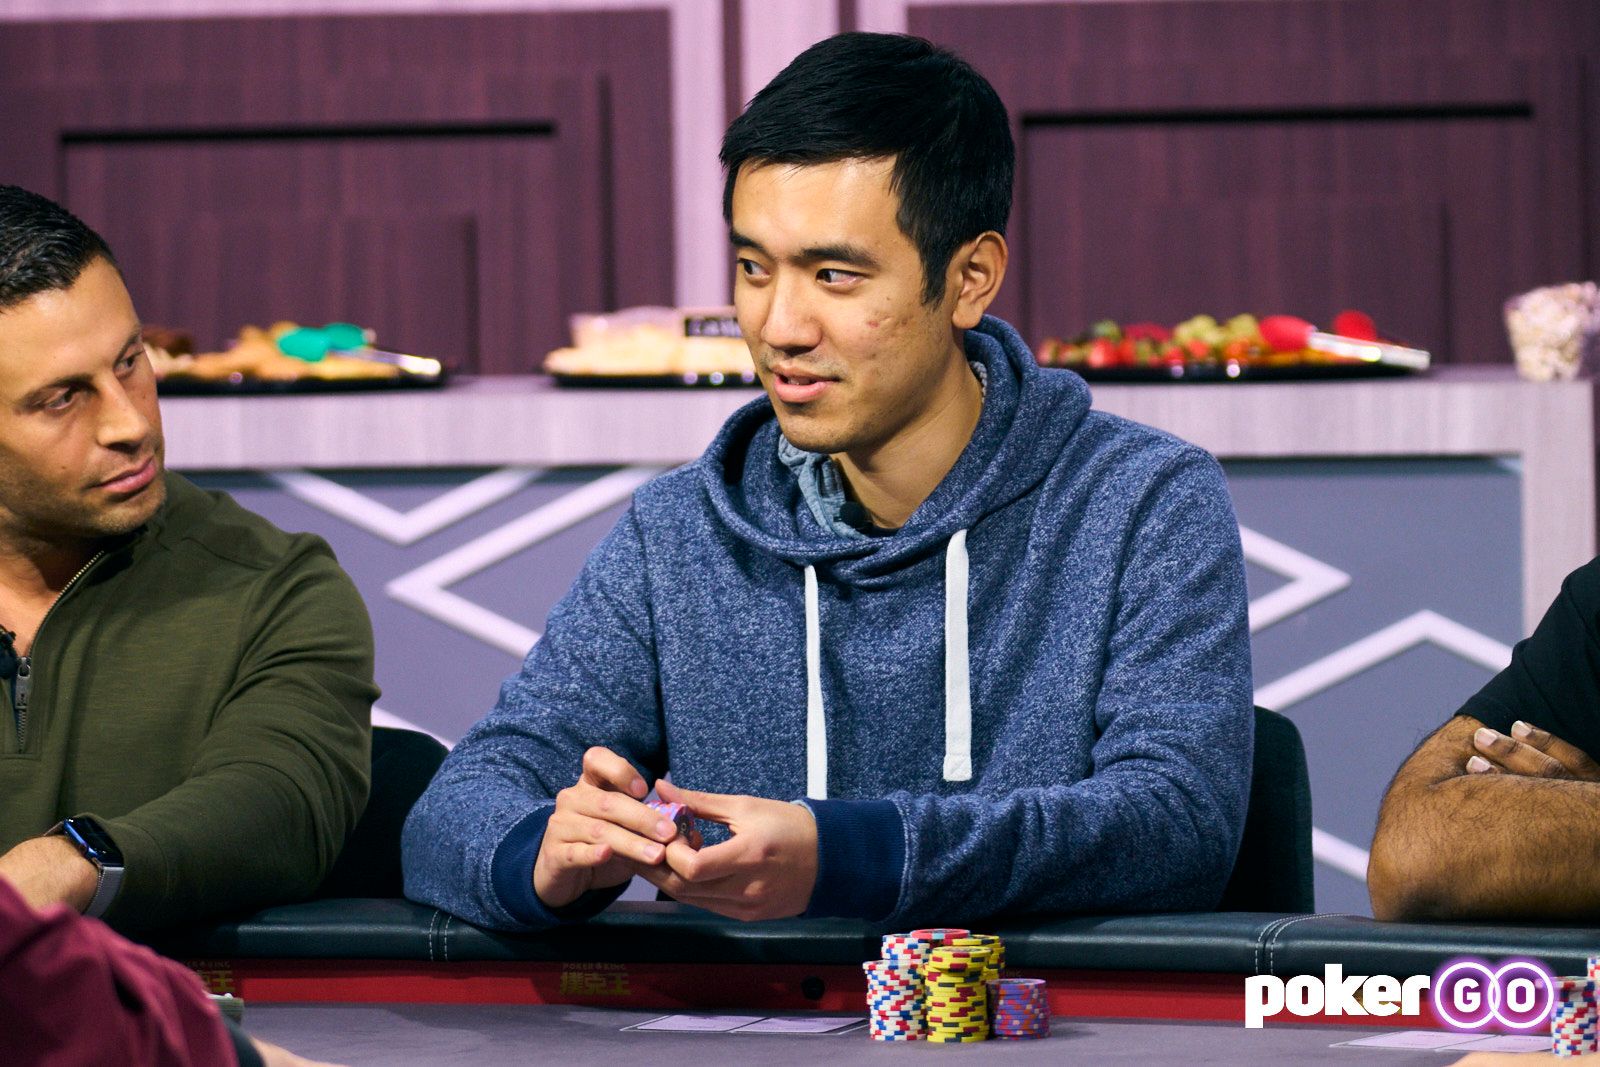 DoorDash Founder Stanley Tang Gets Clobbered on High Stakes Poker